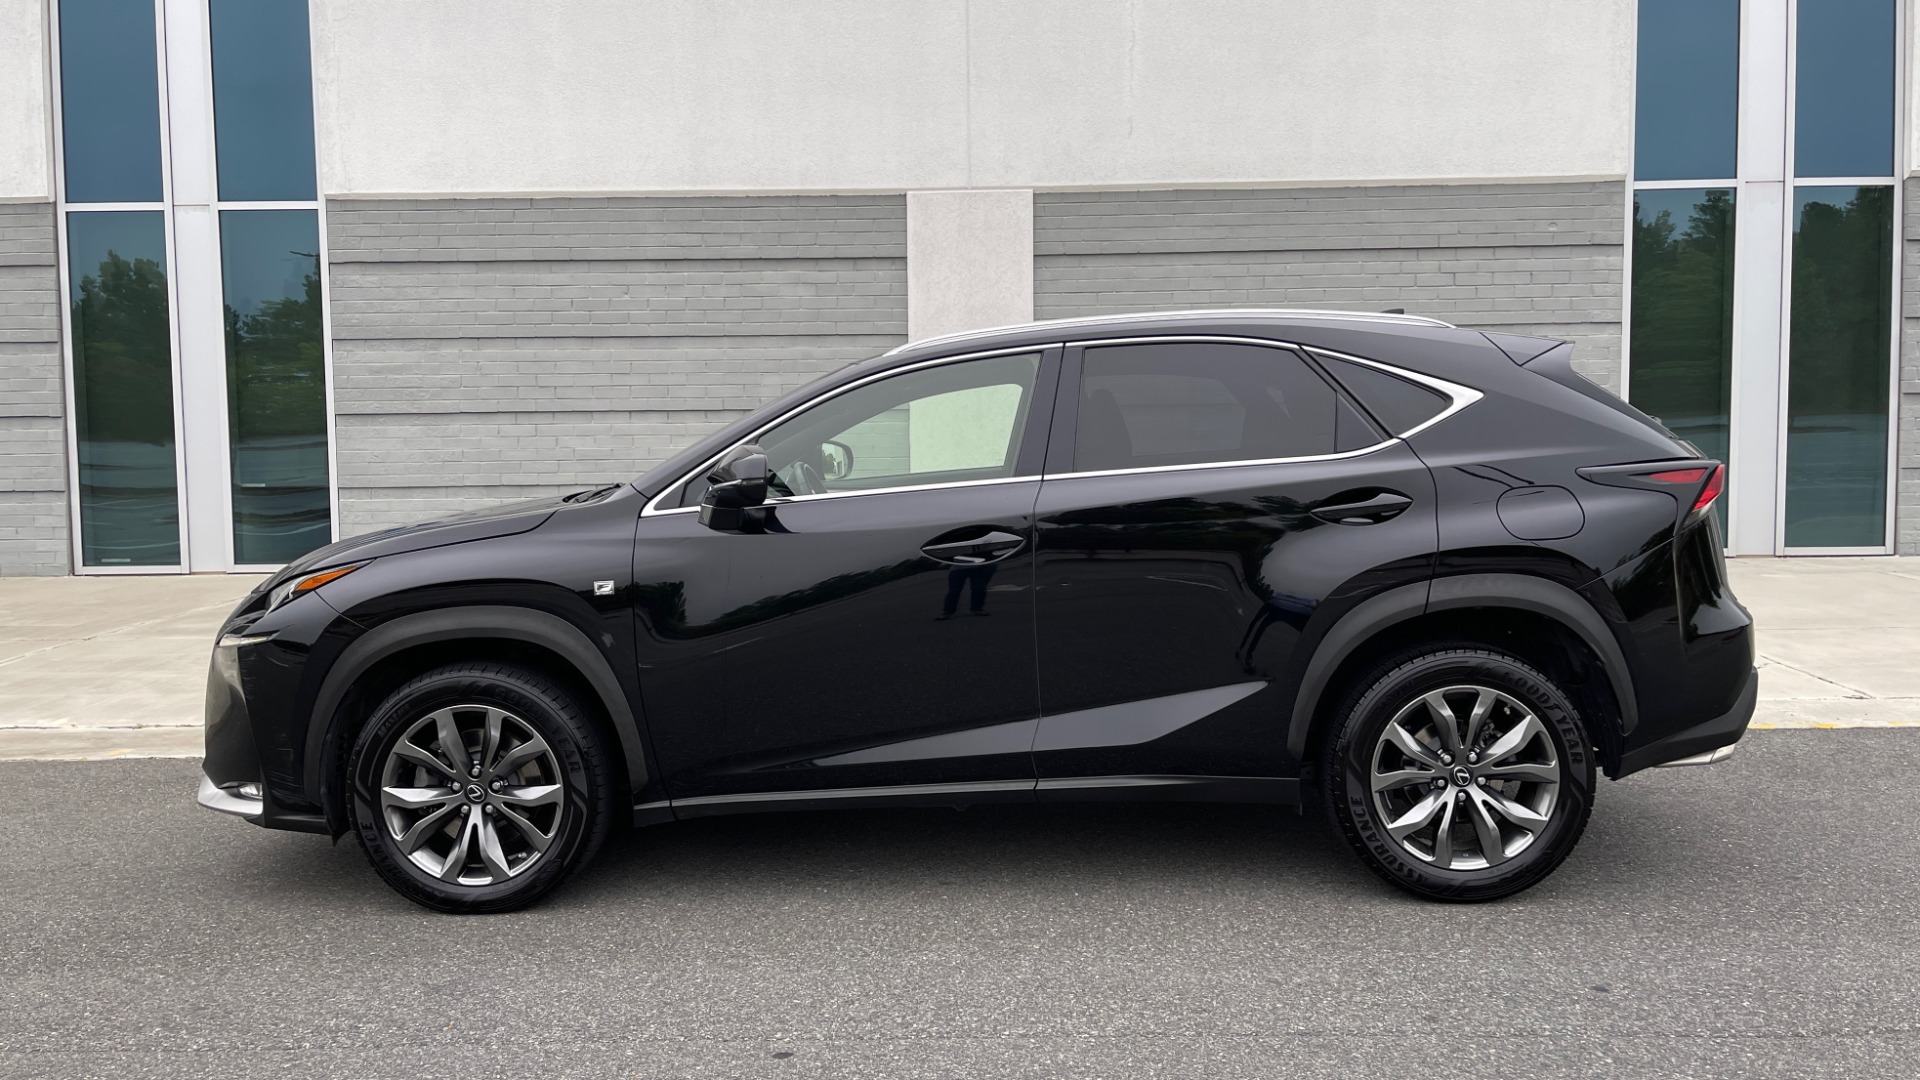 Used 2017 Lexus NX 200T PREMIUM F-SPORT / 2.0L TURBO / BSM / PARK ASST / REARVIEW for sale Sold at Formula Imports in Charlotte NC 28227 4